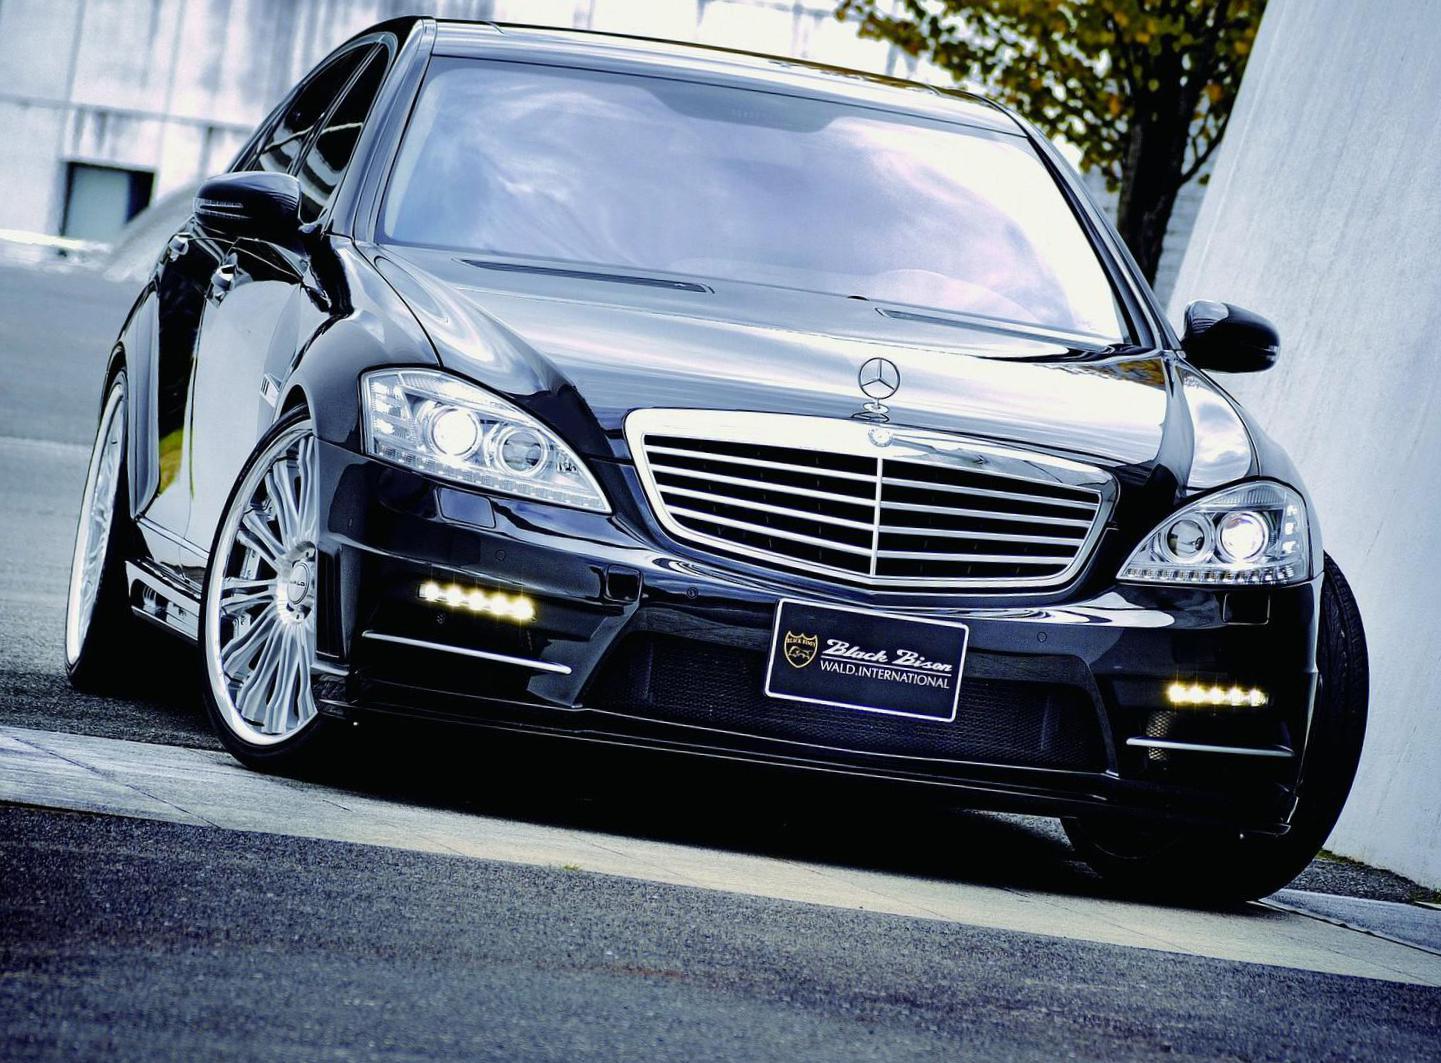 Mercedes S Class (W221) Photo And Specs. Photo: S Class (W221) Mercedes New And 23 Perfect Photo Of Mercedes S Class (W221)